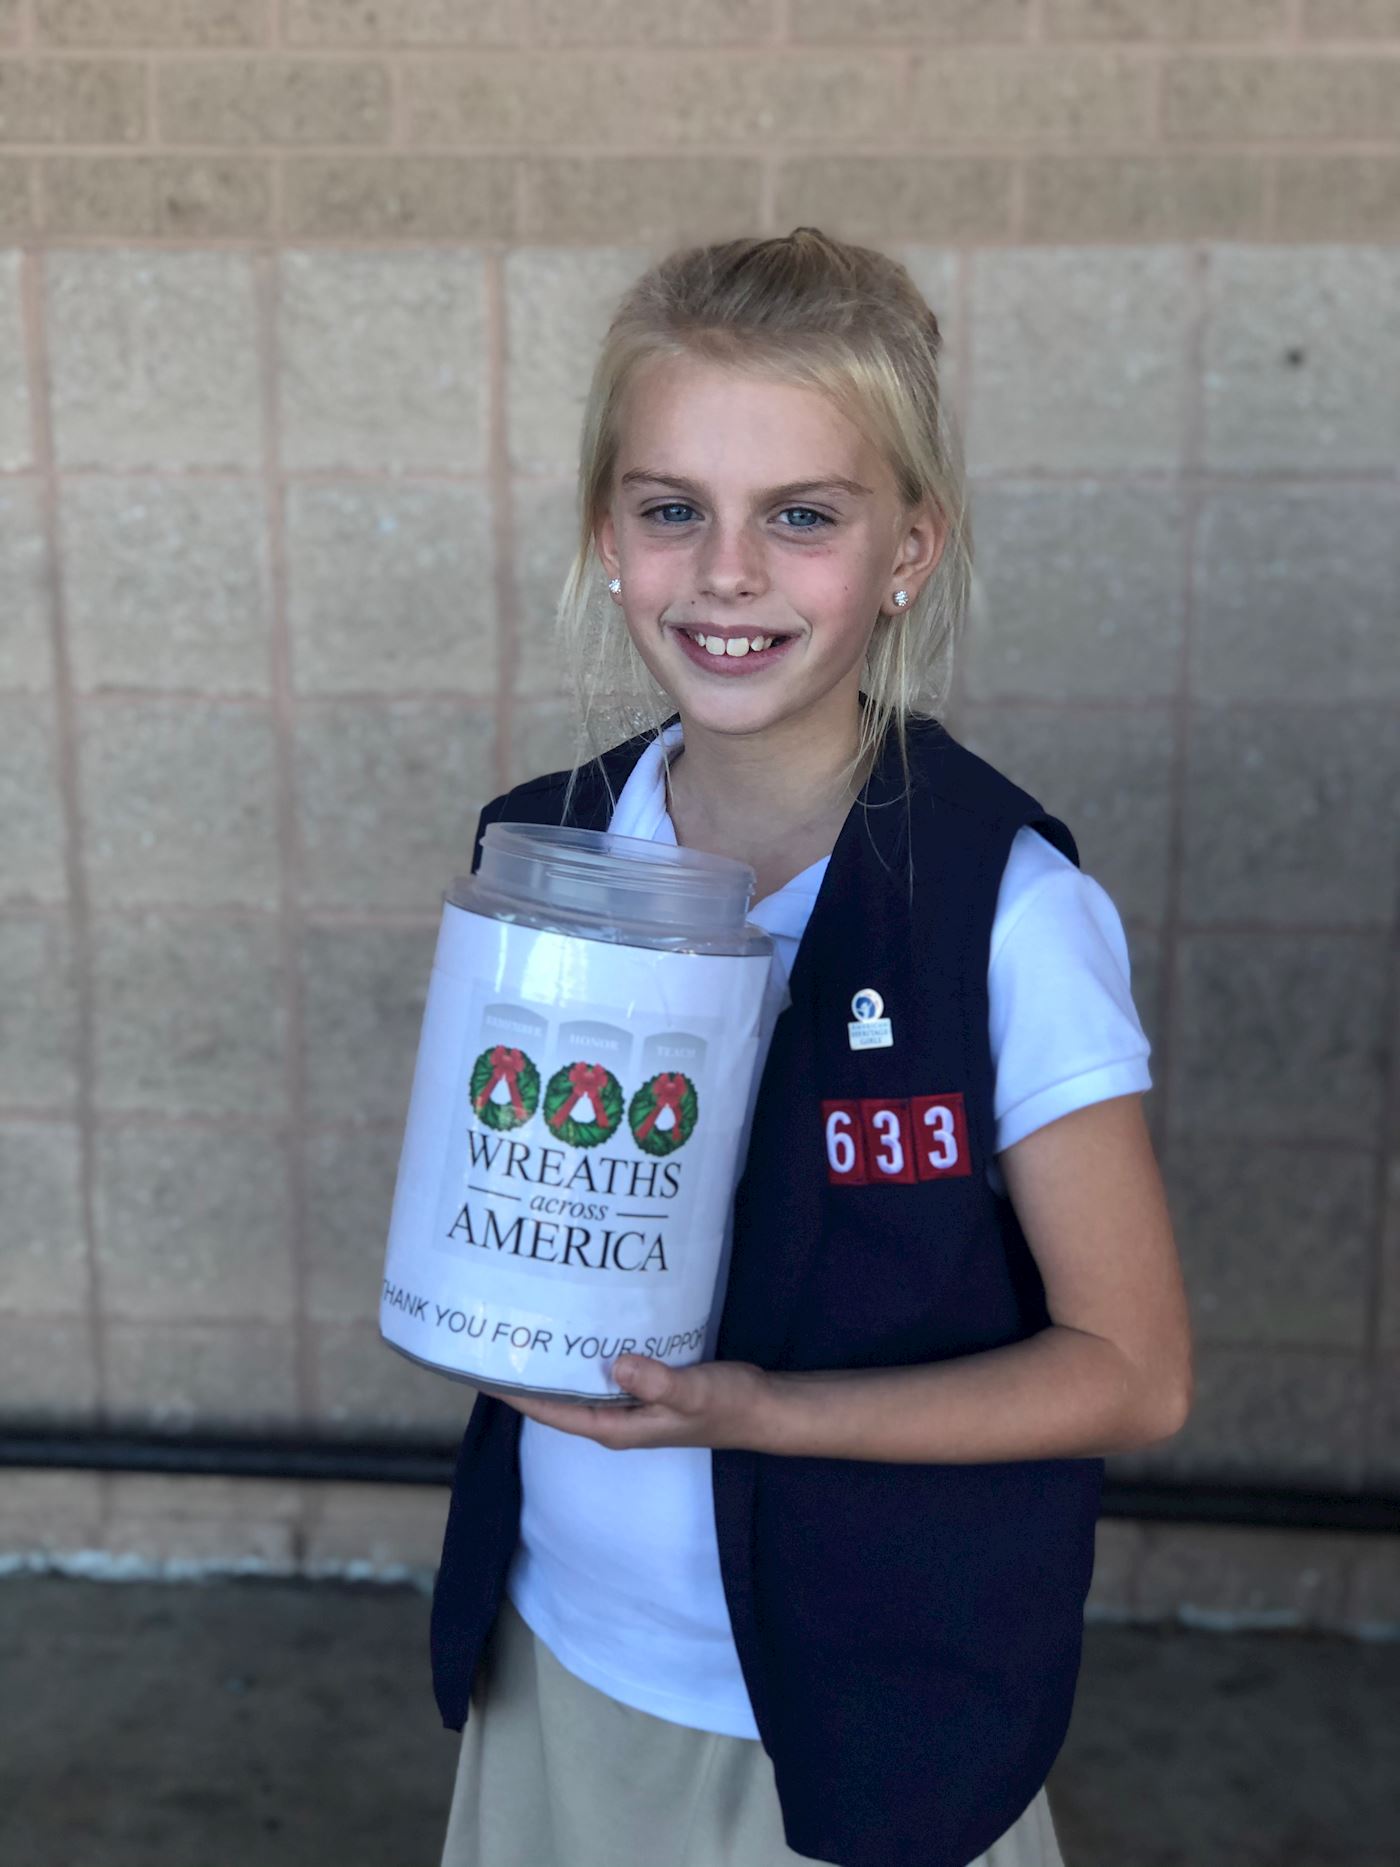 Audrey is continuing to support Wreaths Across America by collecting donations in 2019